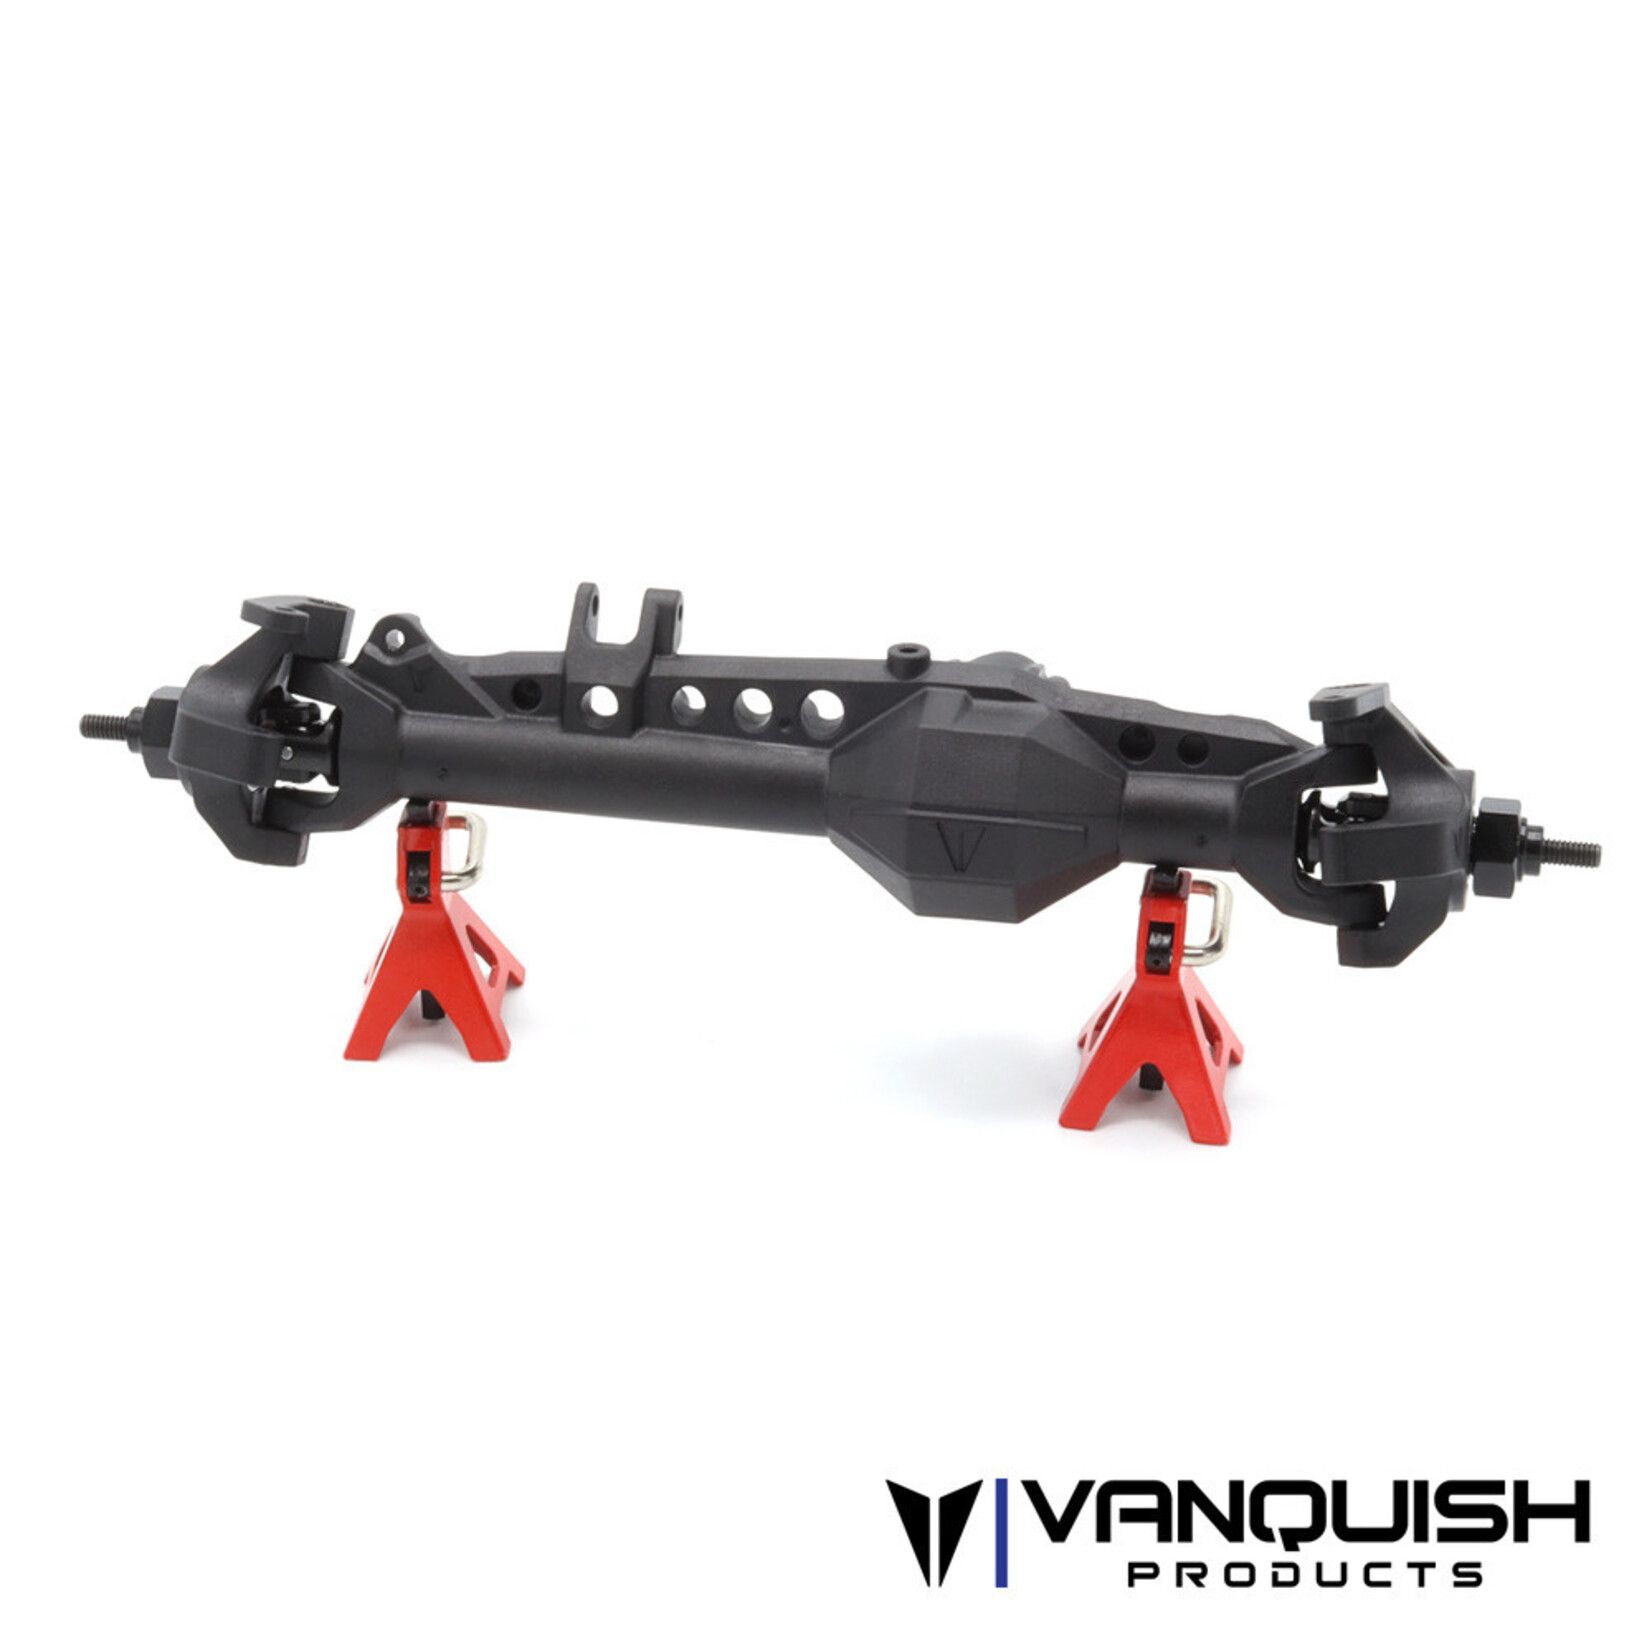 Vanquish Products Vanquish Products F10 Straight Front Axle Set